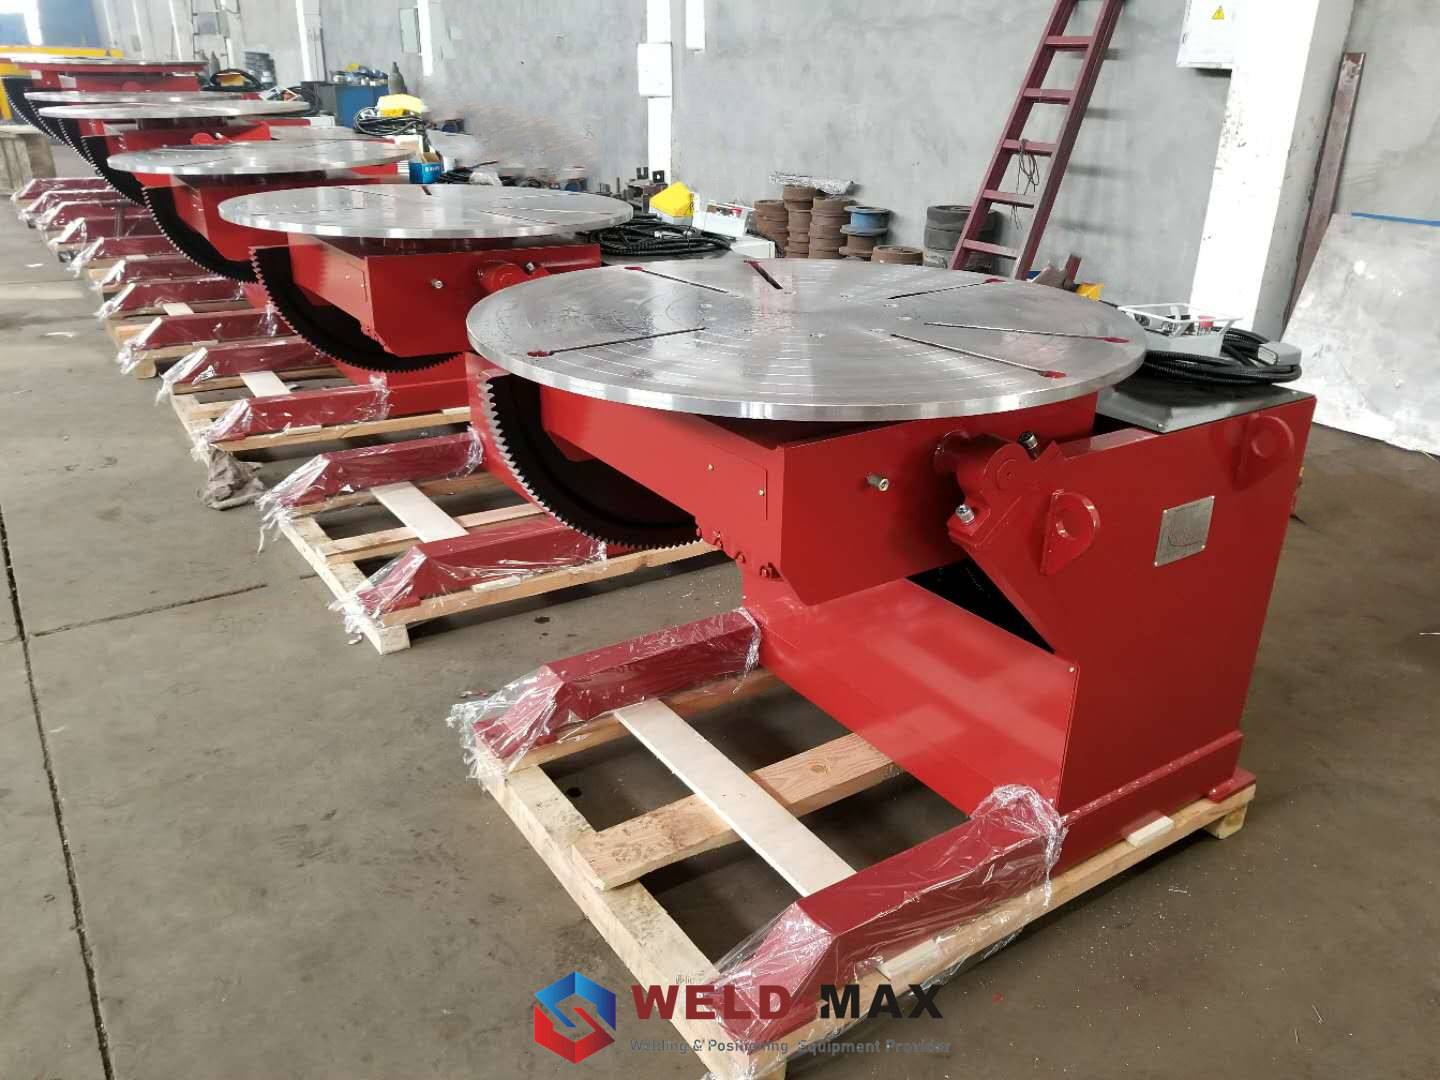 Welding And Positioning Equipment— The Production Of The Welidng Positioner